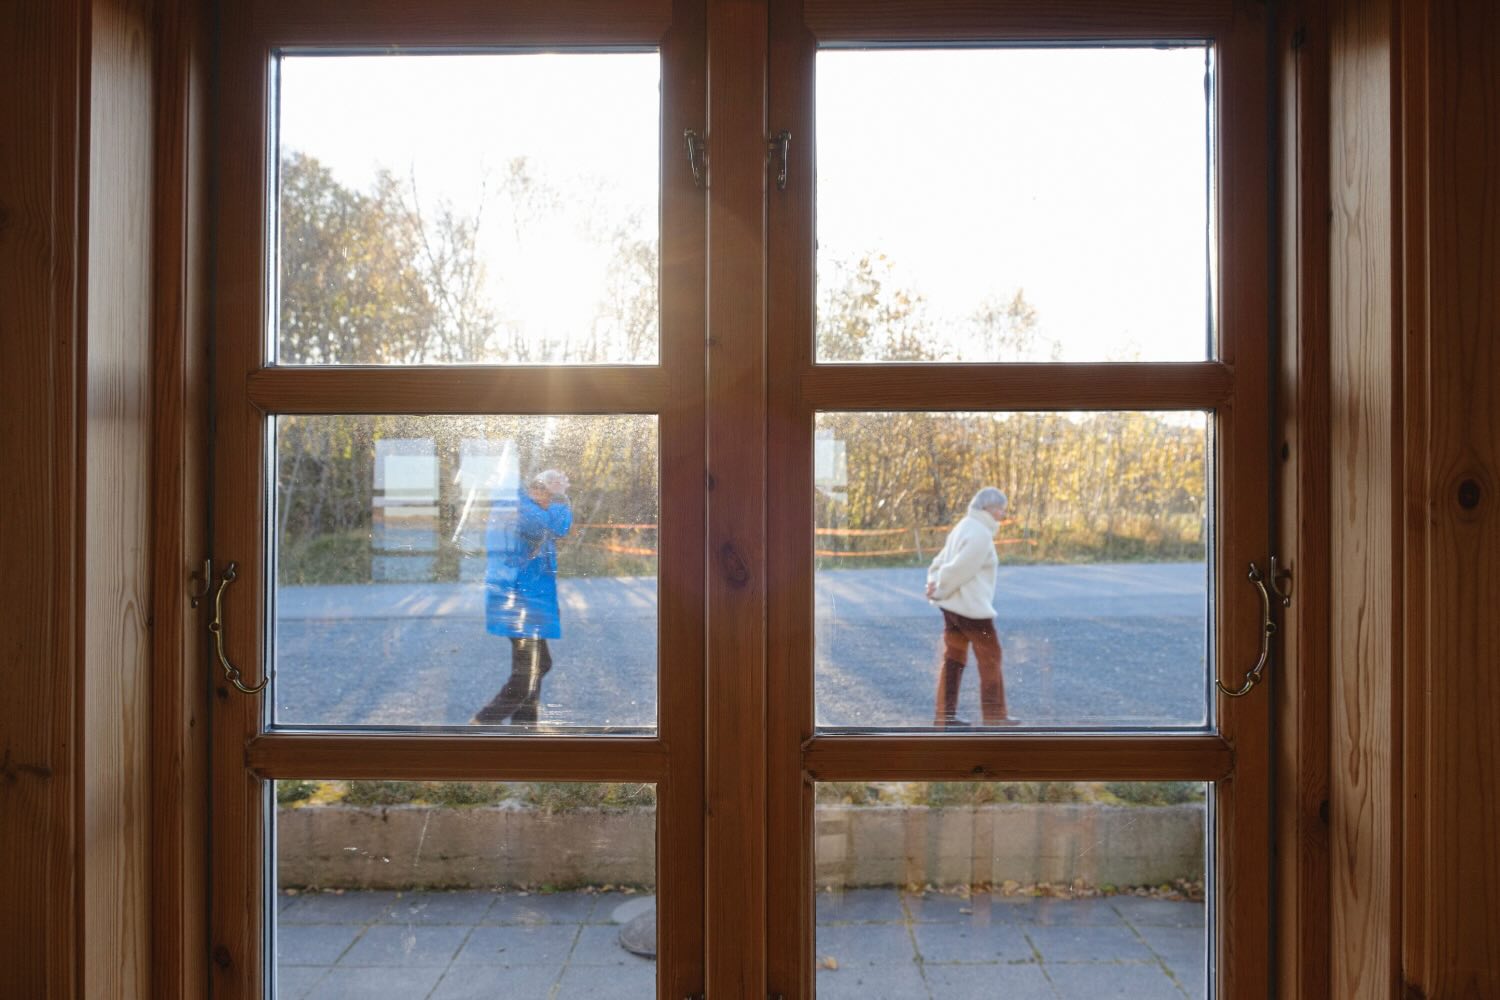 Two people seen walking through closed glass doors